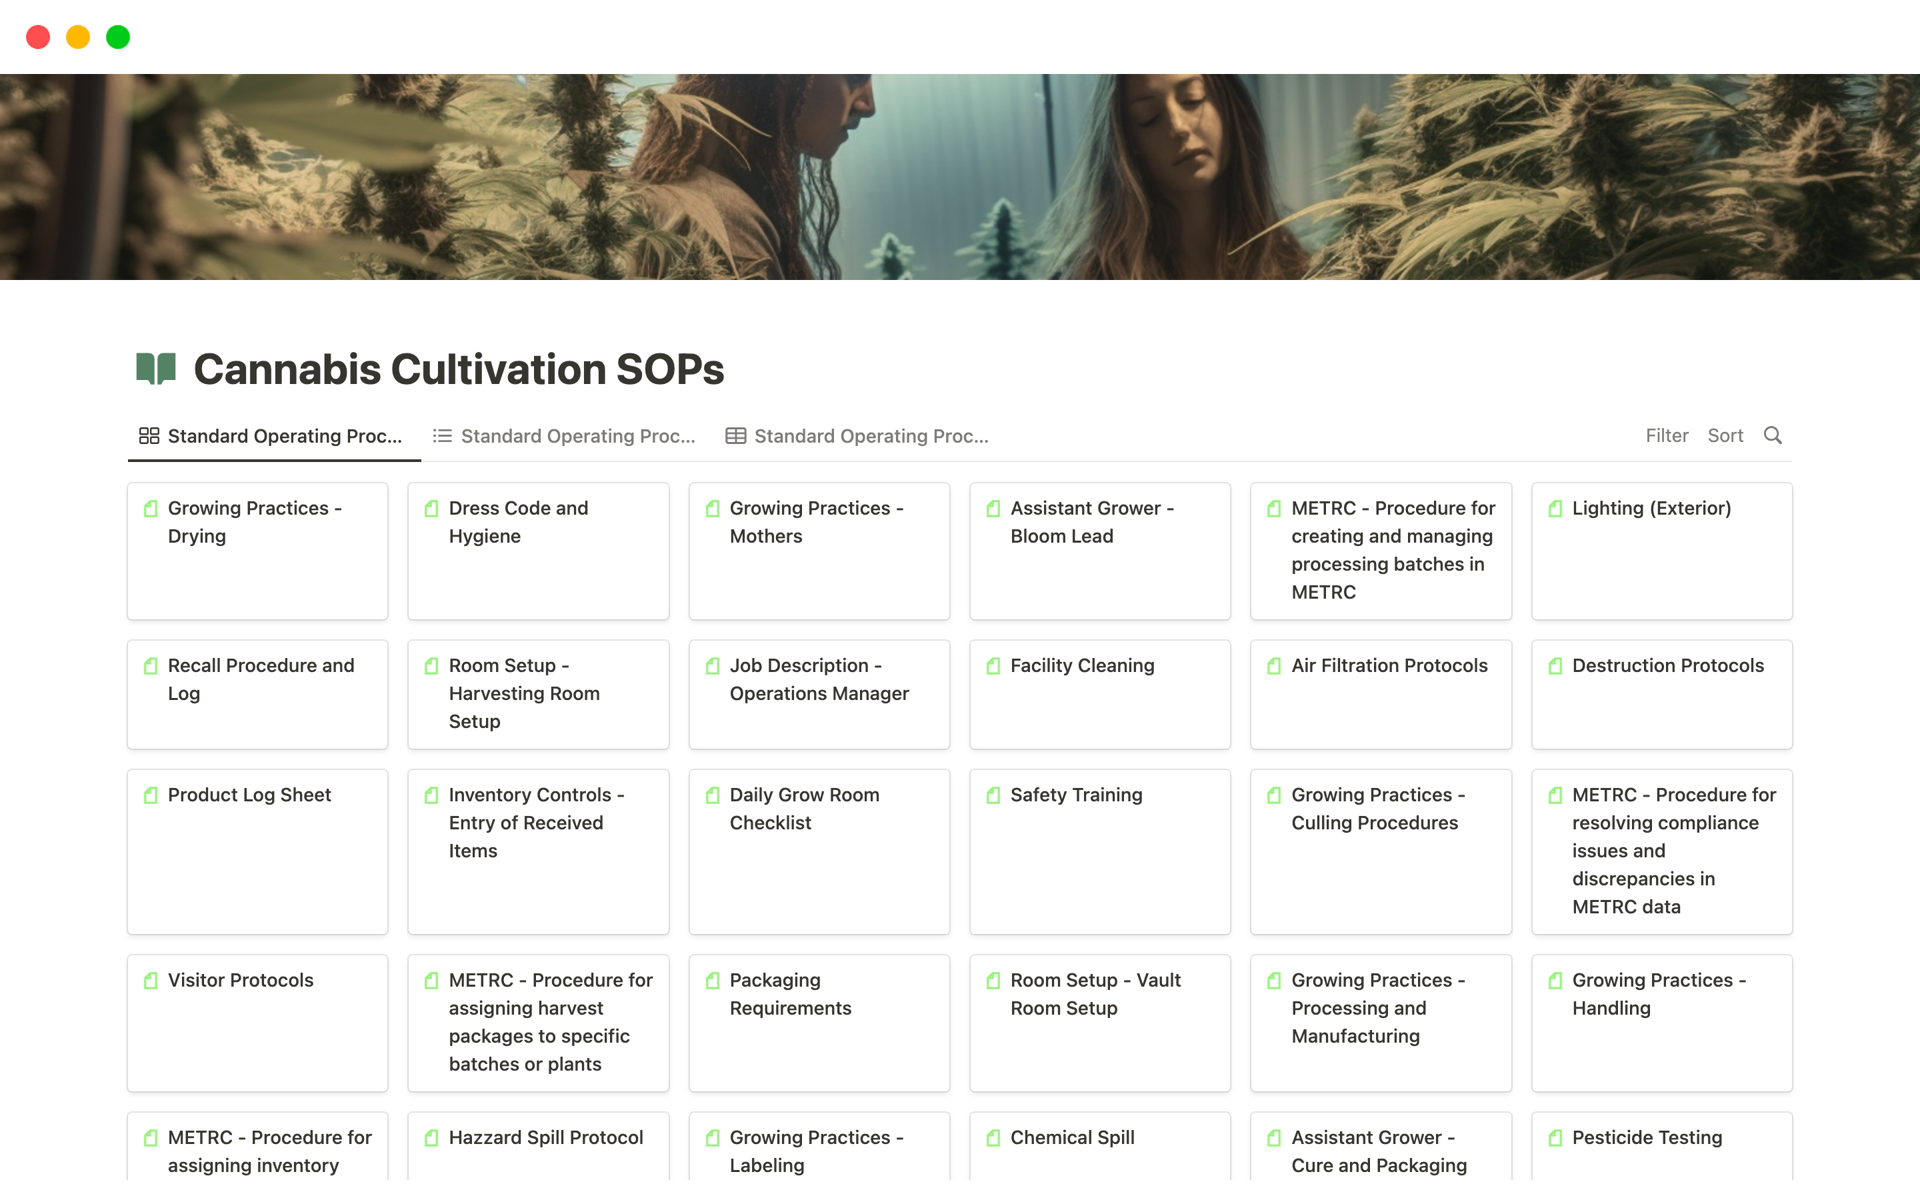 A comprehensive collection of over 180 SOPs has been designed specifically for cannabis cultivators, making compliance simpler and more straightforward than ever before.